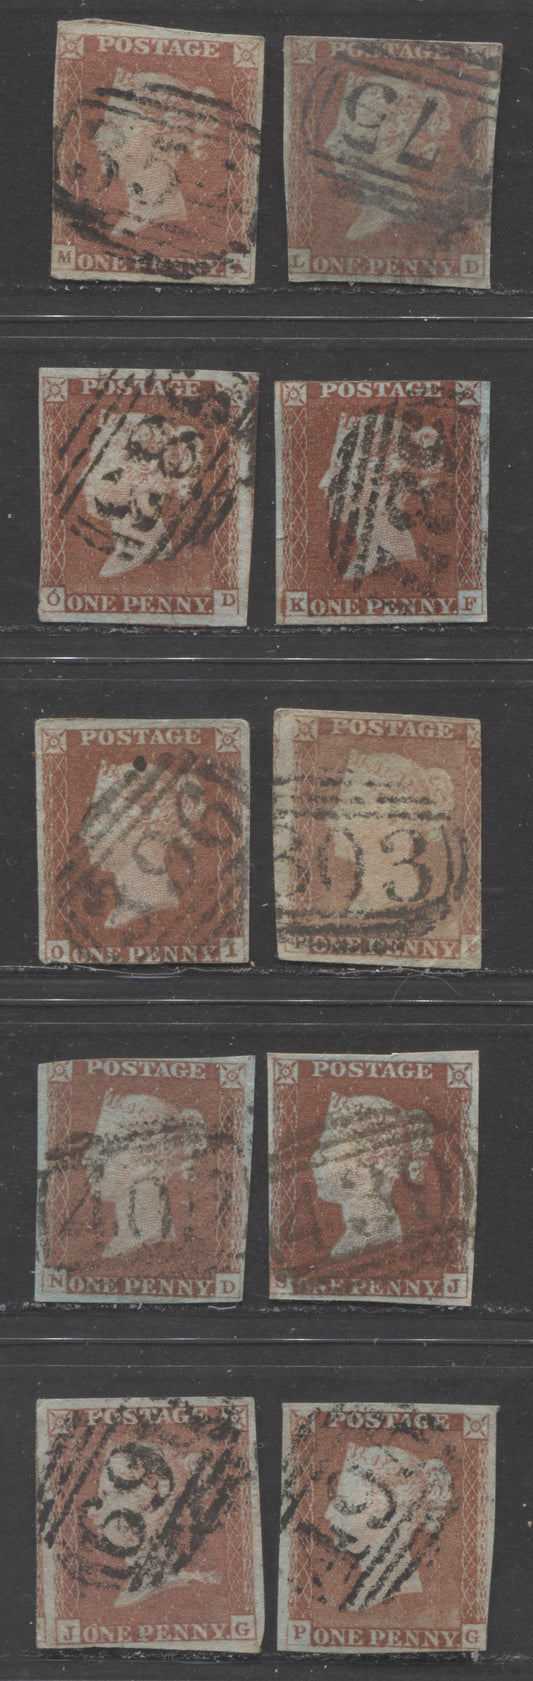 Lot  425 Great Britain - Barred Numeral Cancels For England & Wales: 300-499 SC#3 1d Red Brown 1841-1854 1d Red Imperf Issue, #303, #354, #375, #383, #387, #396, #405, #439, #469 & #495, 10 Good & VG Used Singles, Estimated Value $30